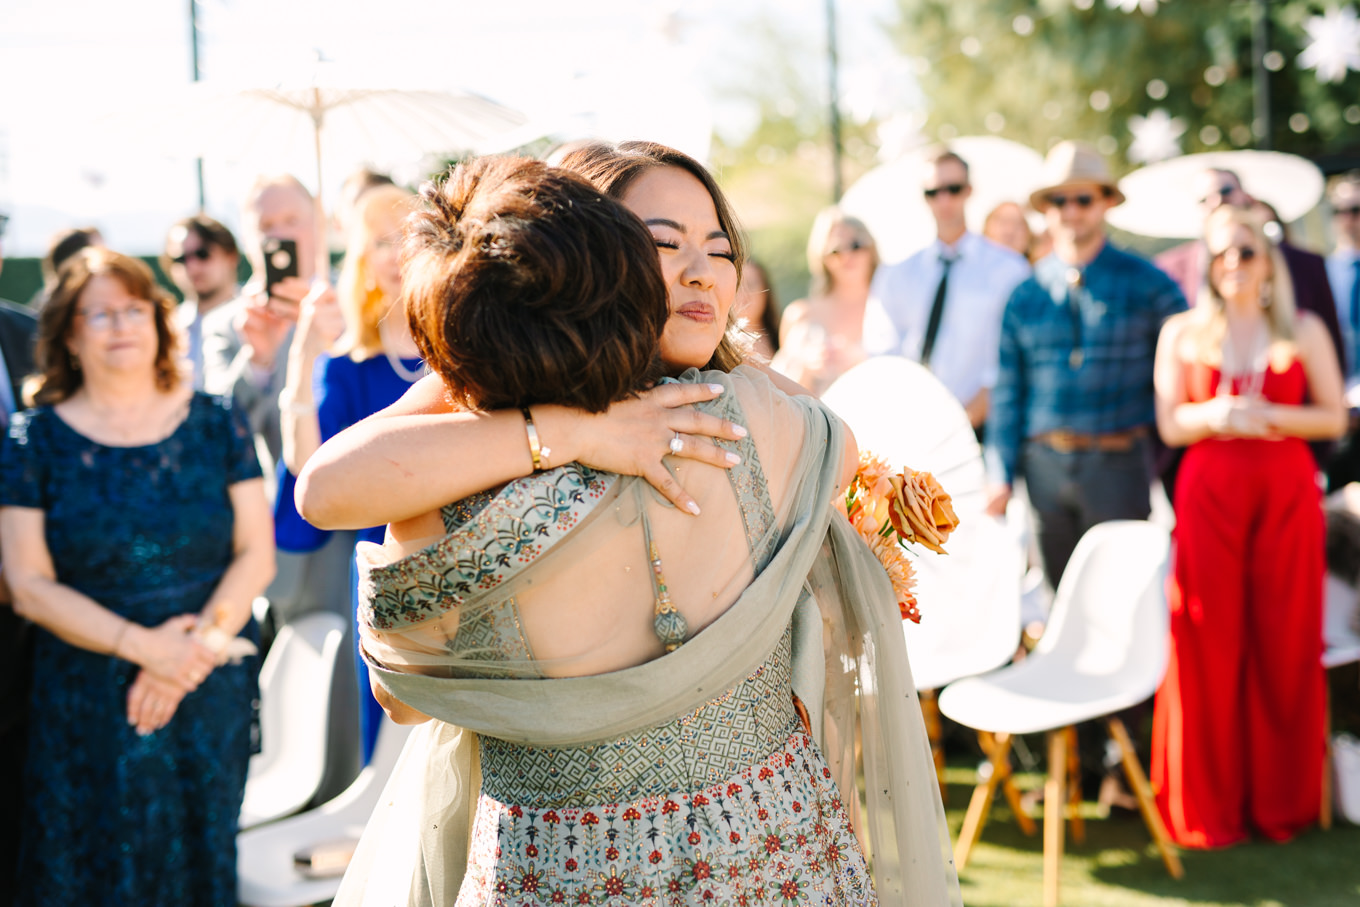 Bride hugging mom at wedding | Pink and orange Lautner Compound wedding | Colorful Palm Springs wedding photography | #palmspringsphotographer #palmspringswedding #lautnercompound #southerncaliforniawedding  Source: Mary Costa Photography | Los Angeles